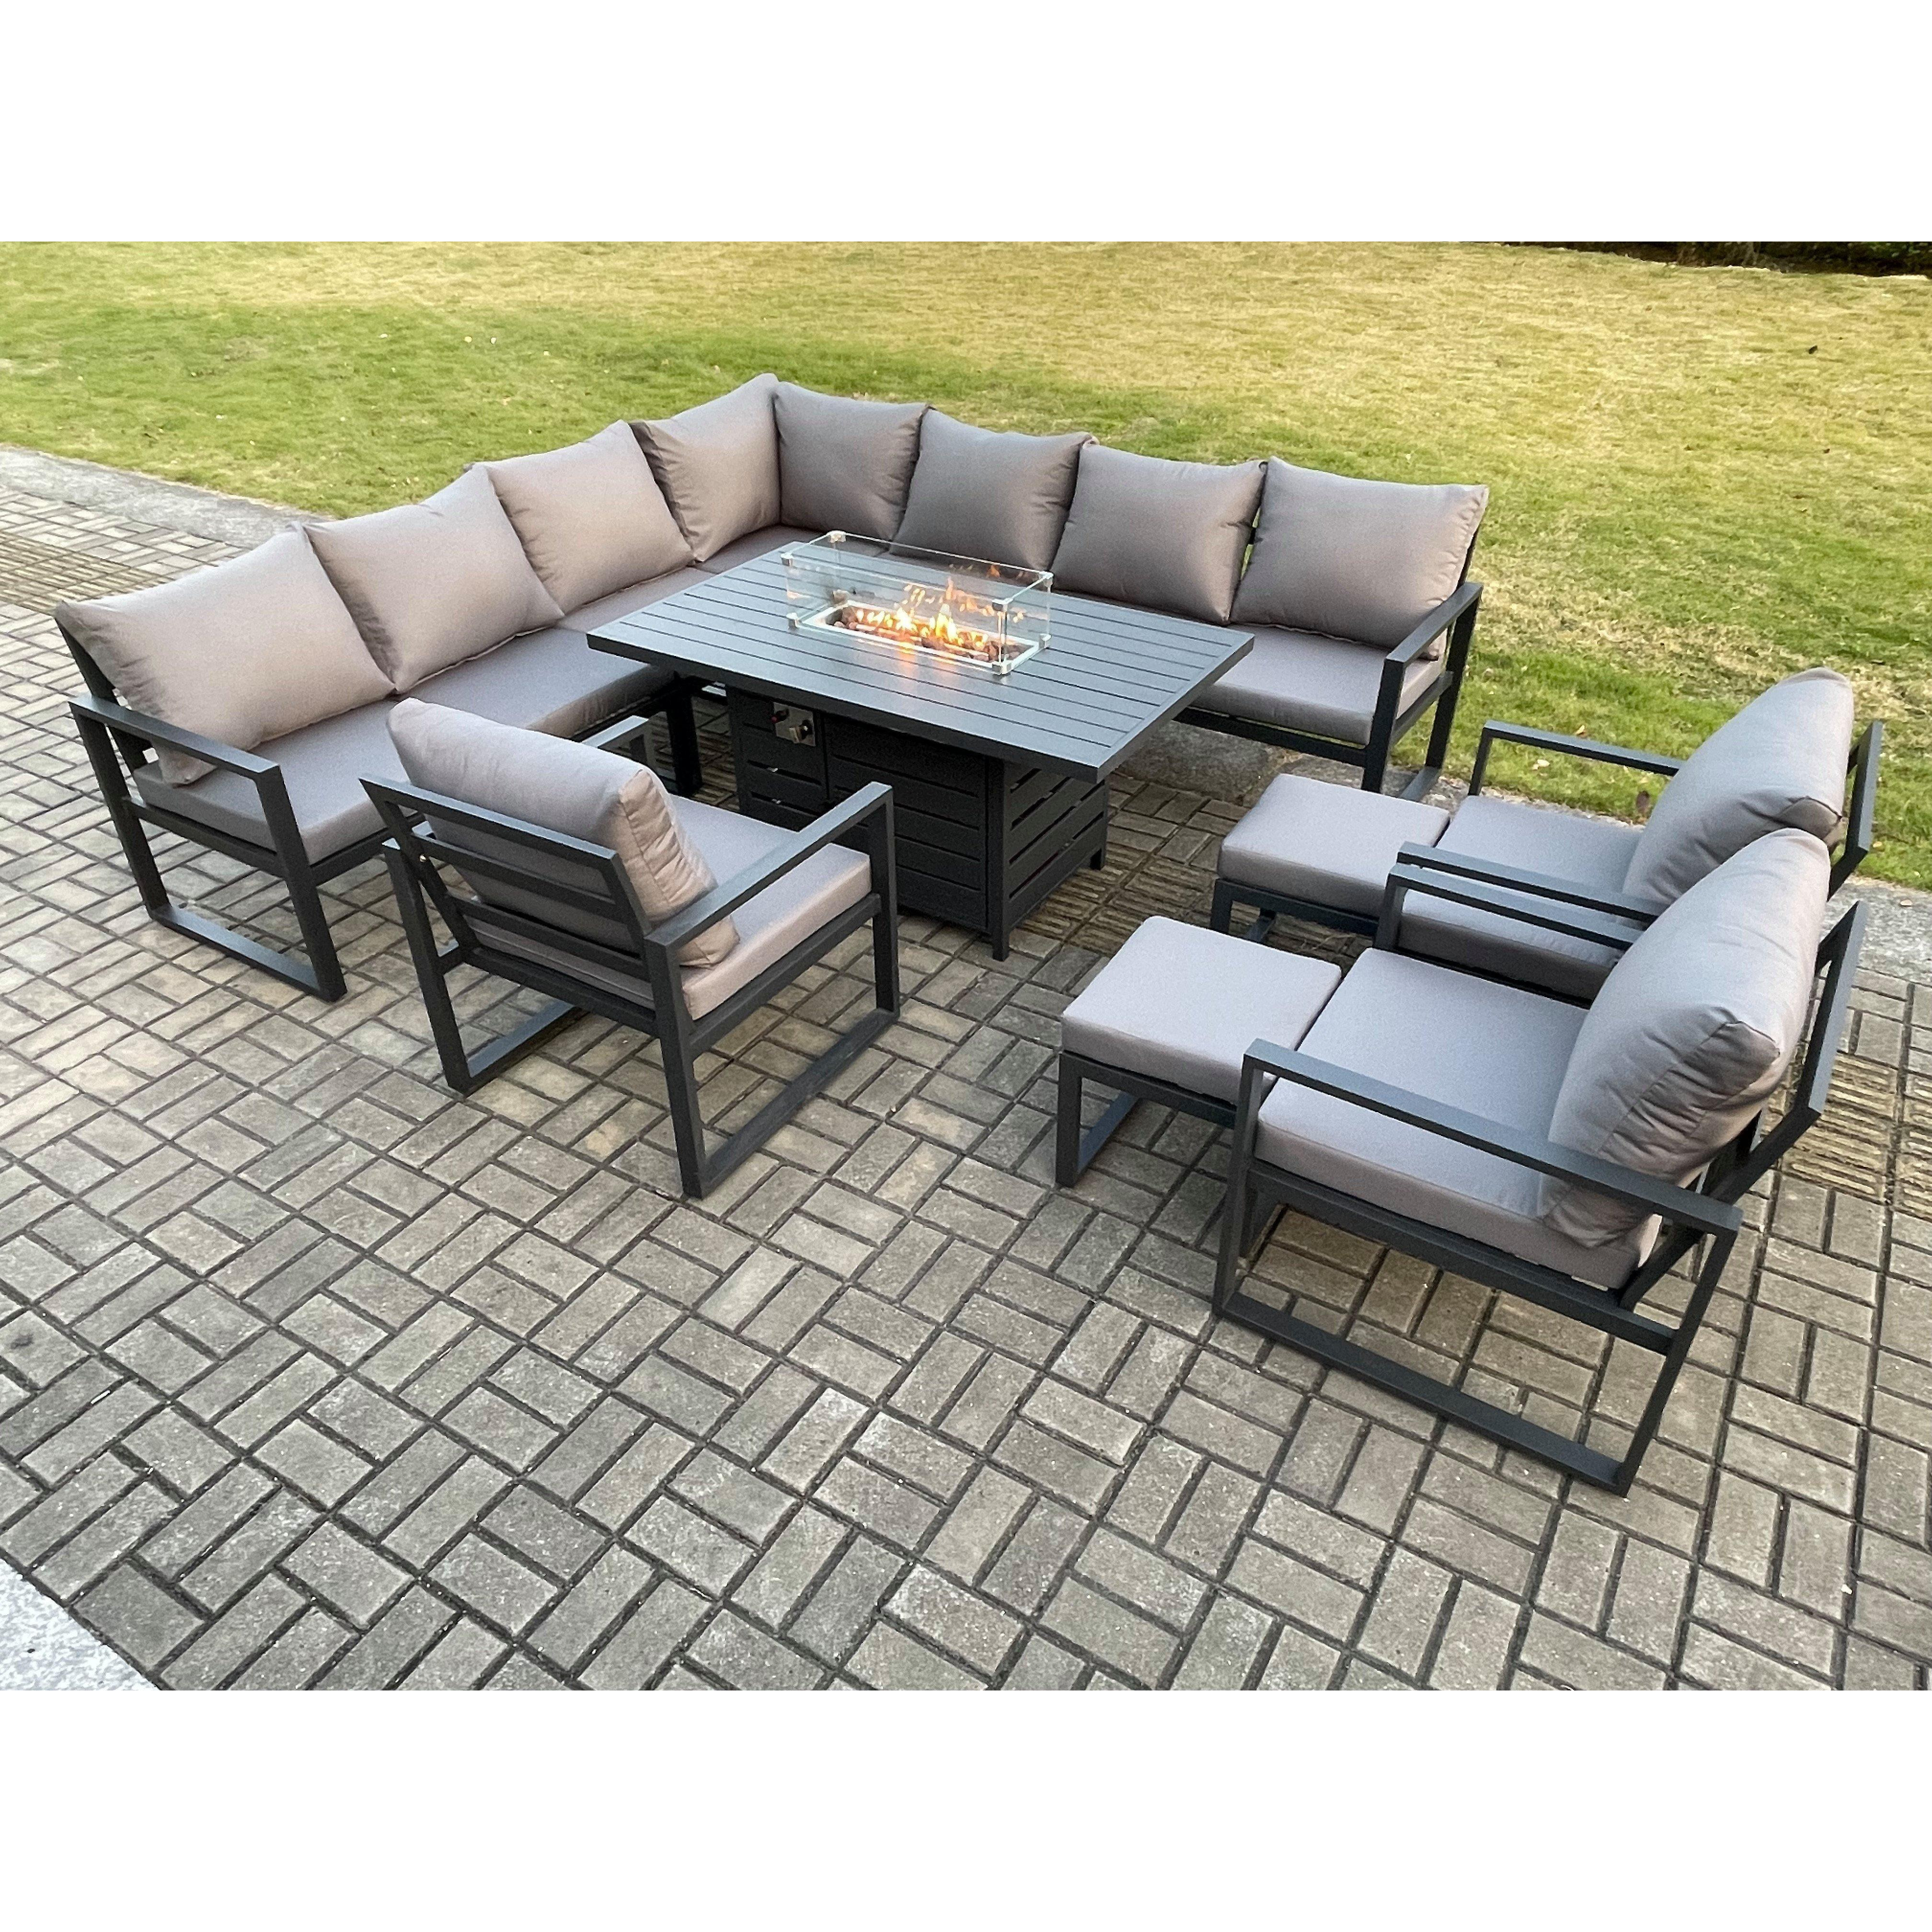 Aluminium 12 Seater Garden Furniture Outdoor Set Patio Lounge Sofa Gas Fire Pit Dining Table Set with 3 Chairs Dark Grey - image 1